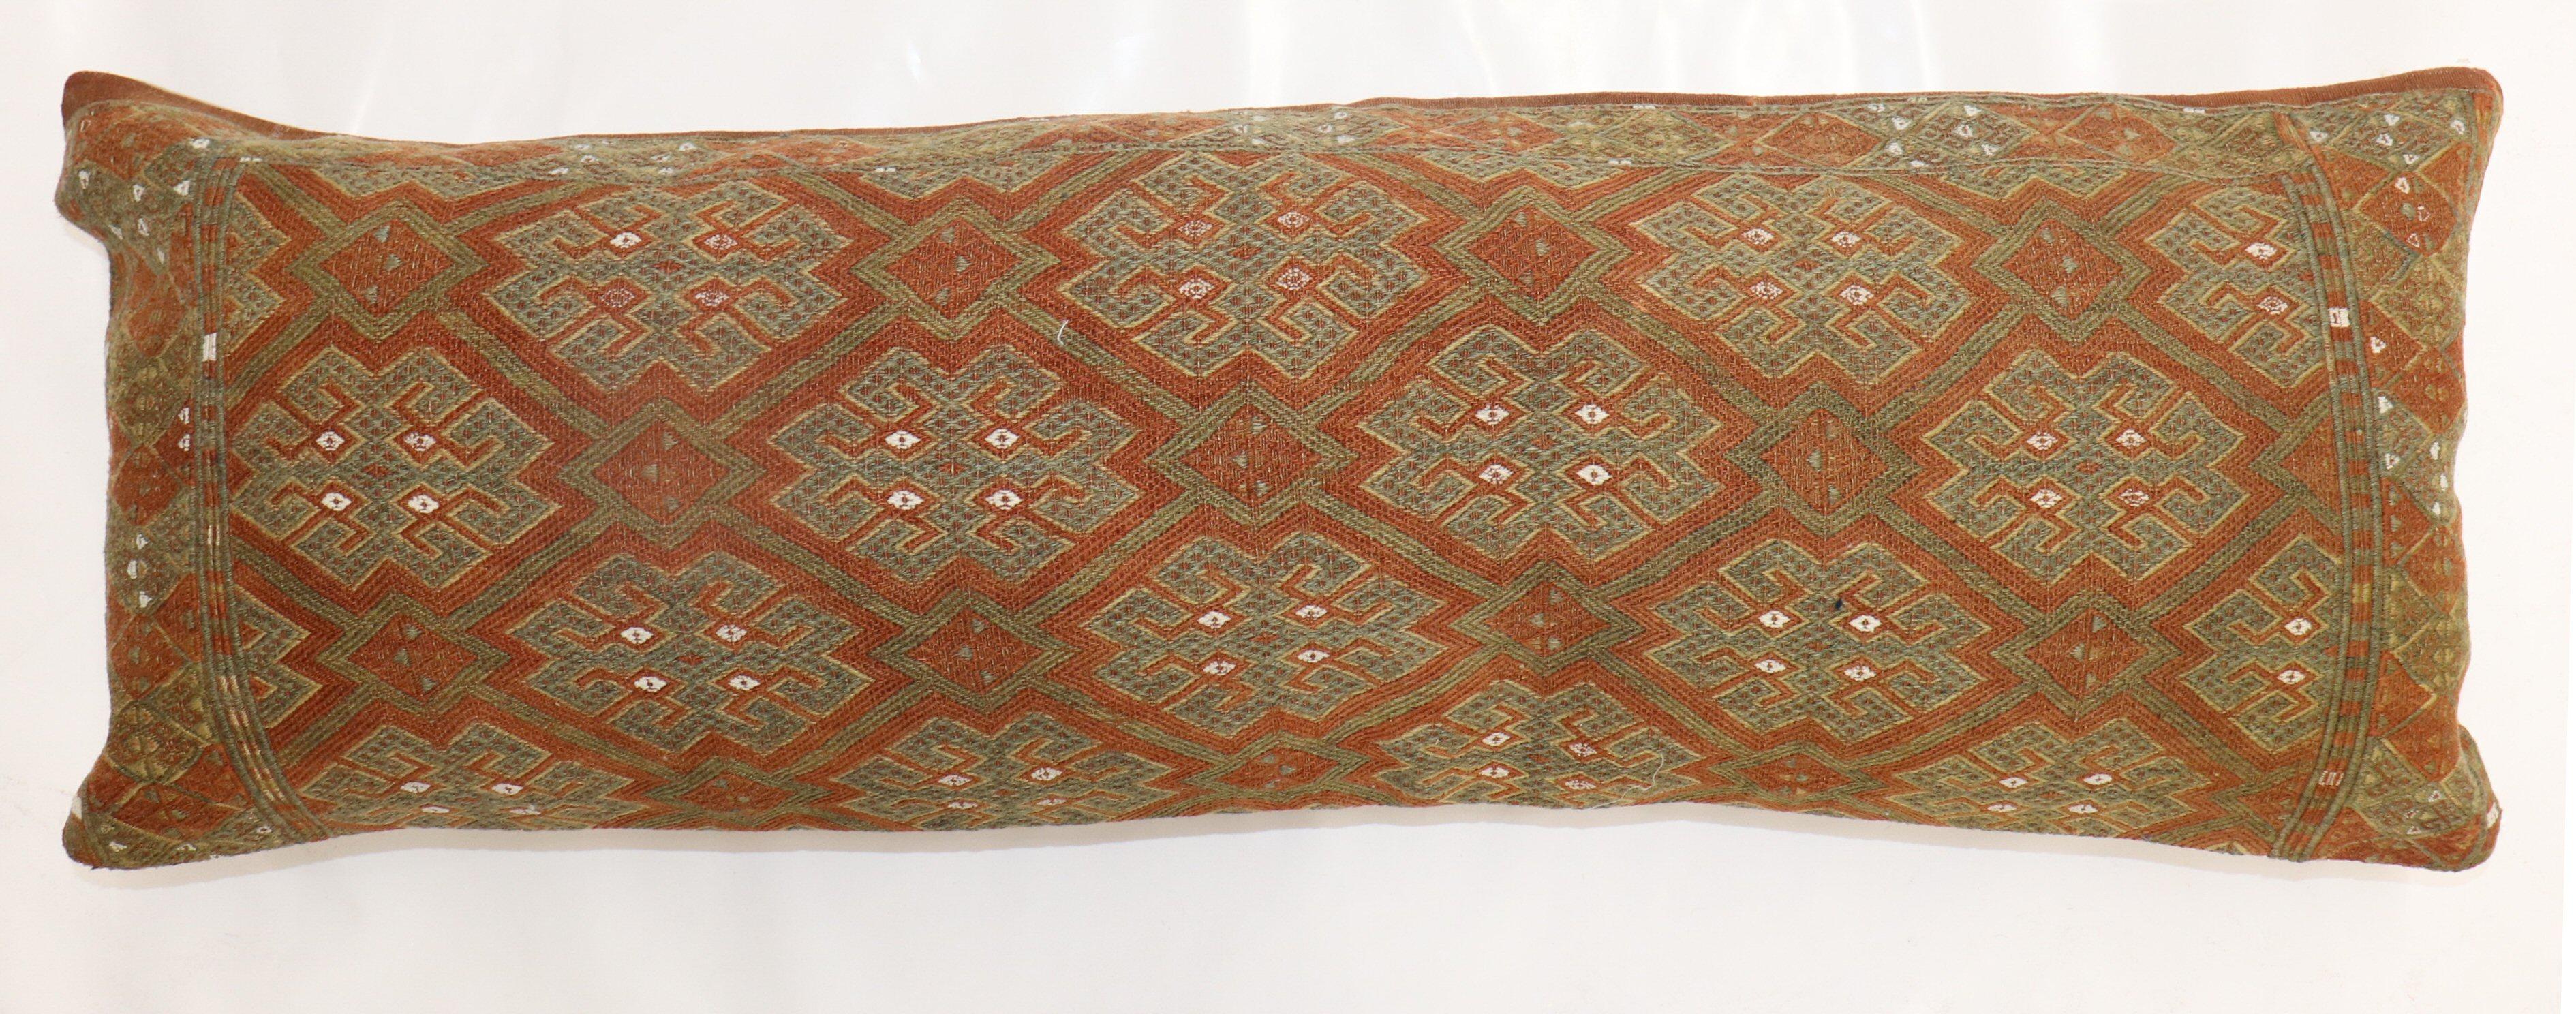 Pillow made from a Turkish flat-weave jajim . 

Measures: 13'' x 38''.